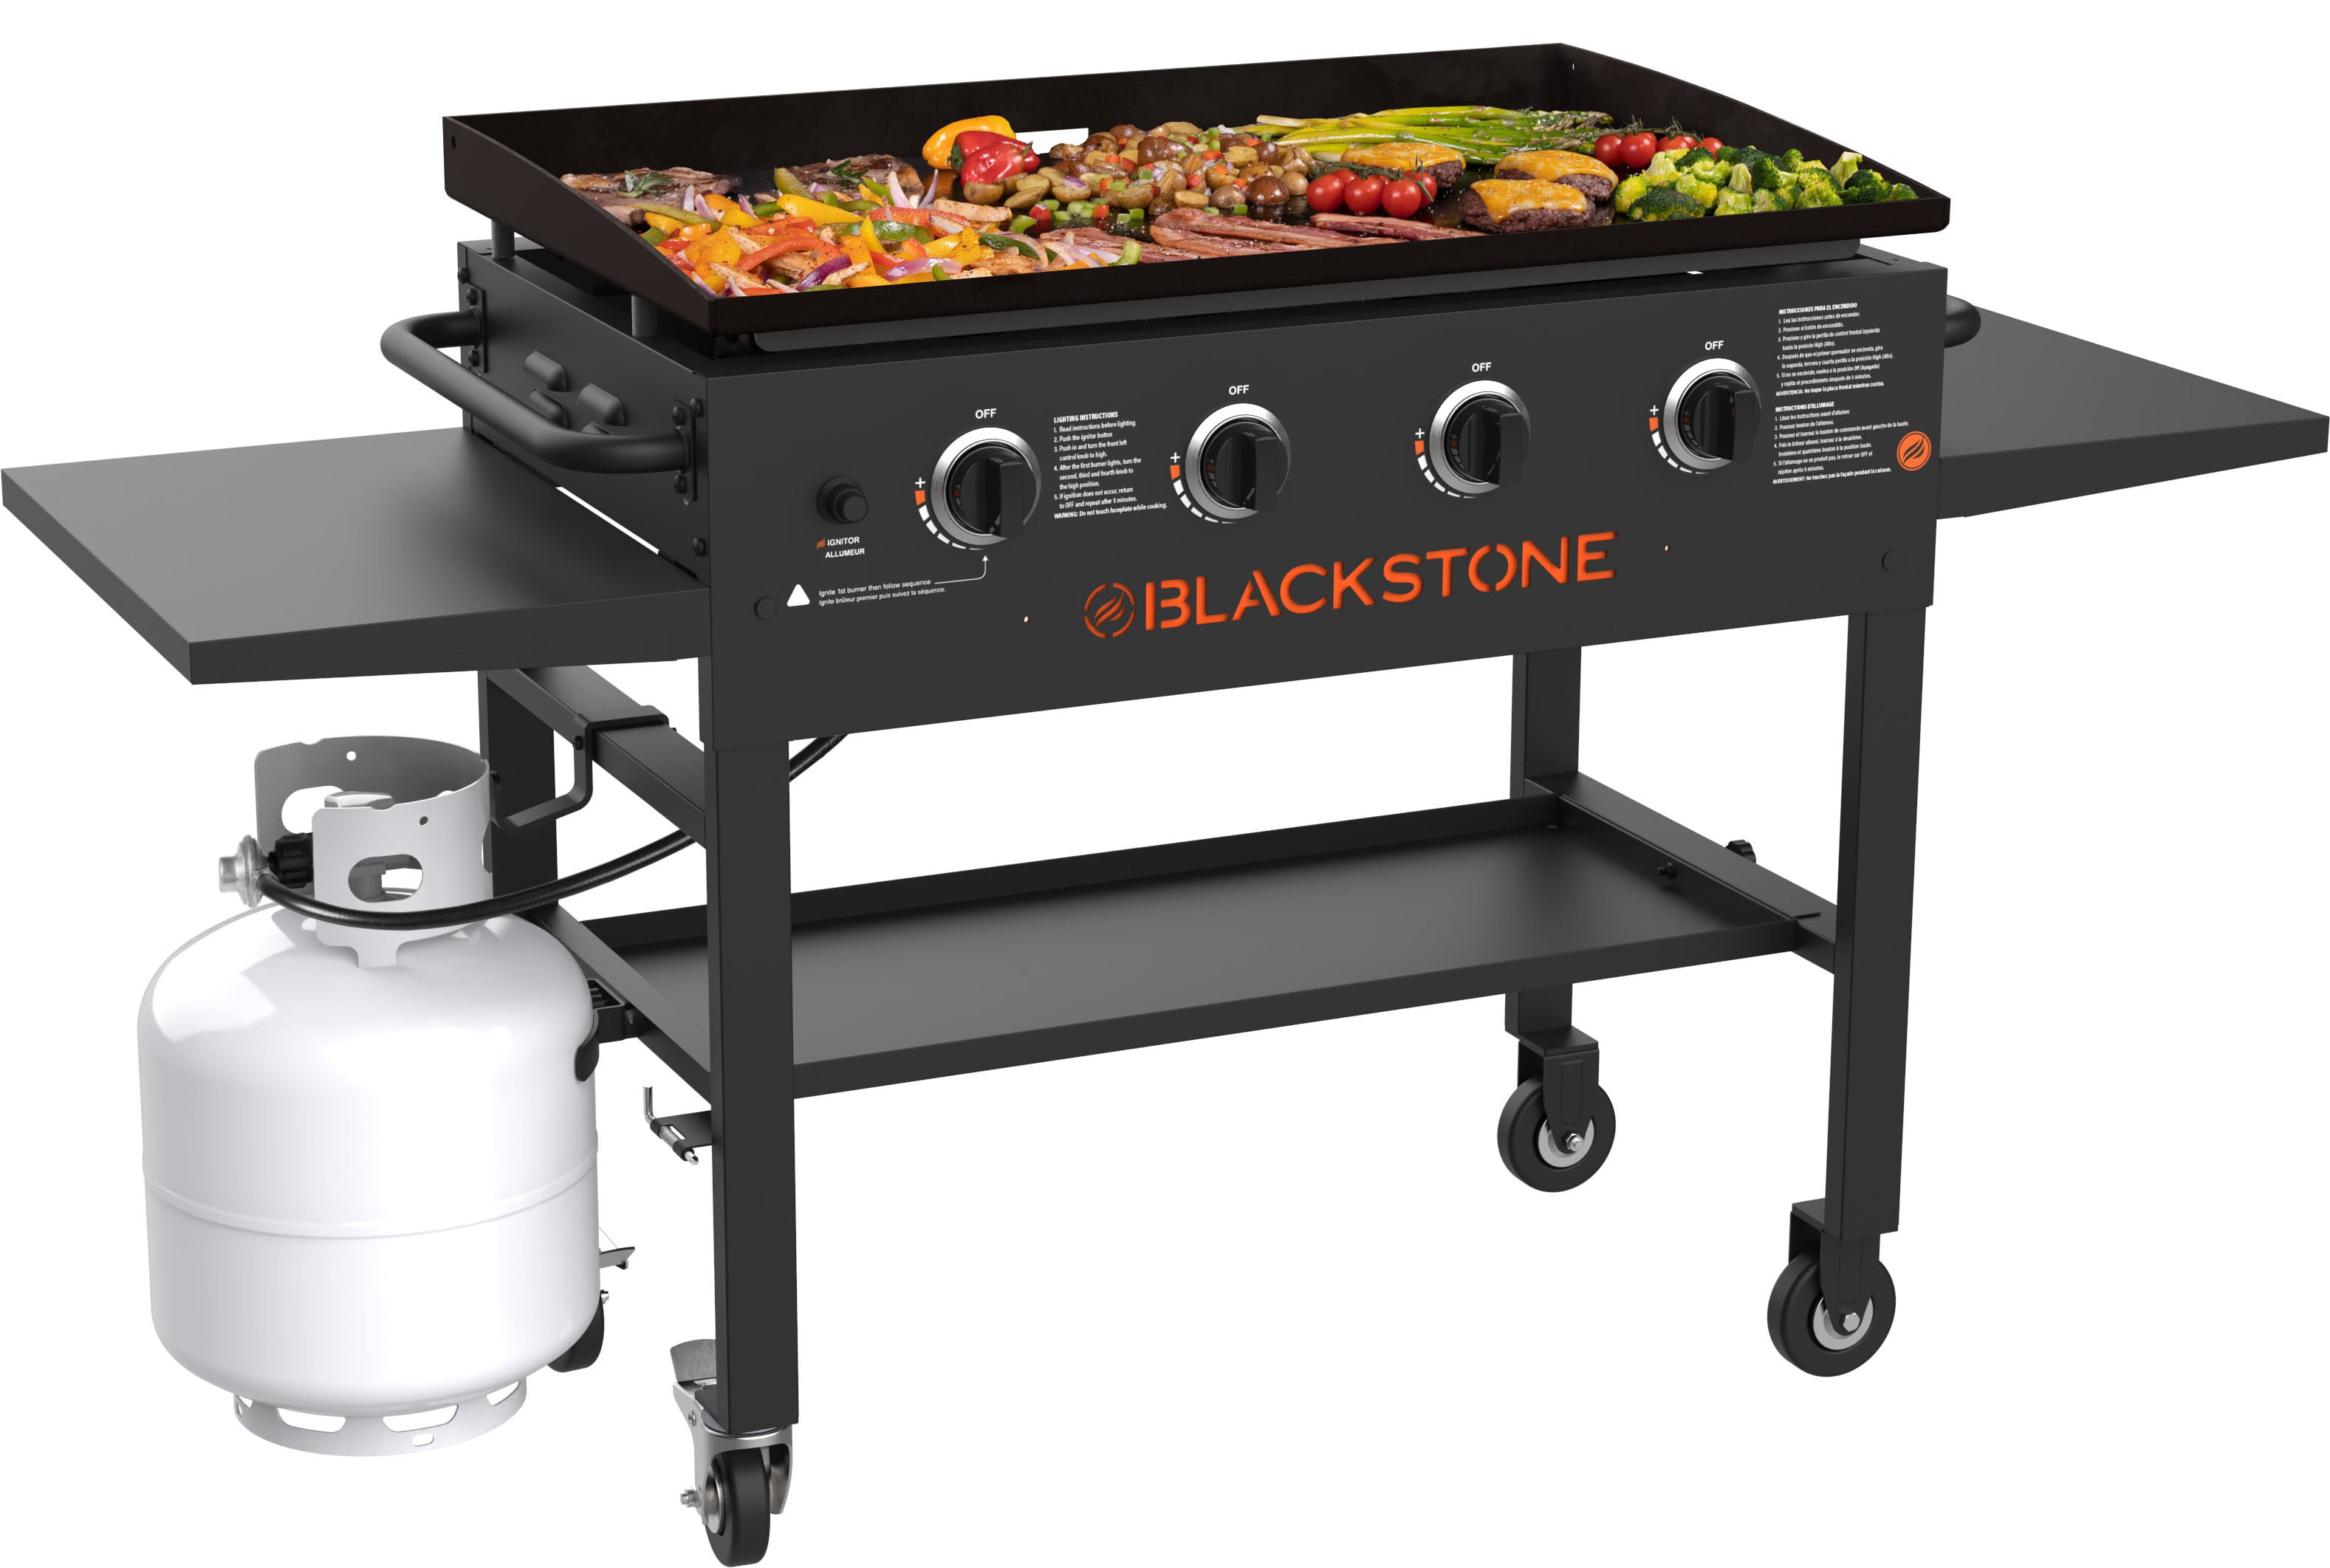 36 Inches Blackstone 1554 Cooking 4 Burner Flat Top Gas Grill Propane Fuelled Restaurant Grade Professional Outdoor Griddle Station with Side Shelf Black & 1780 12 Round Basting Cover 